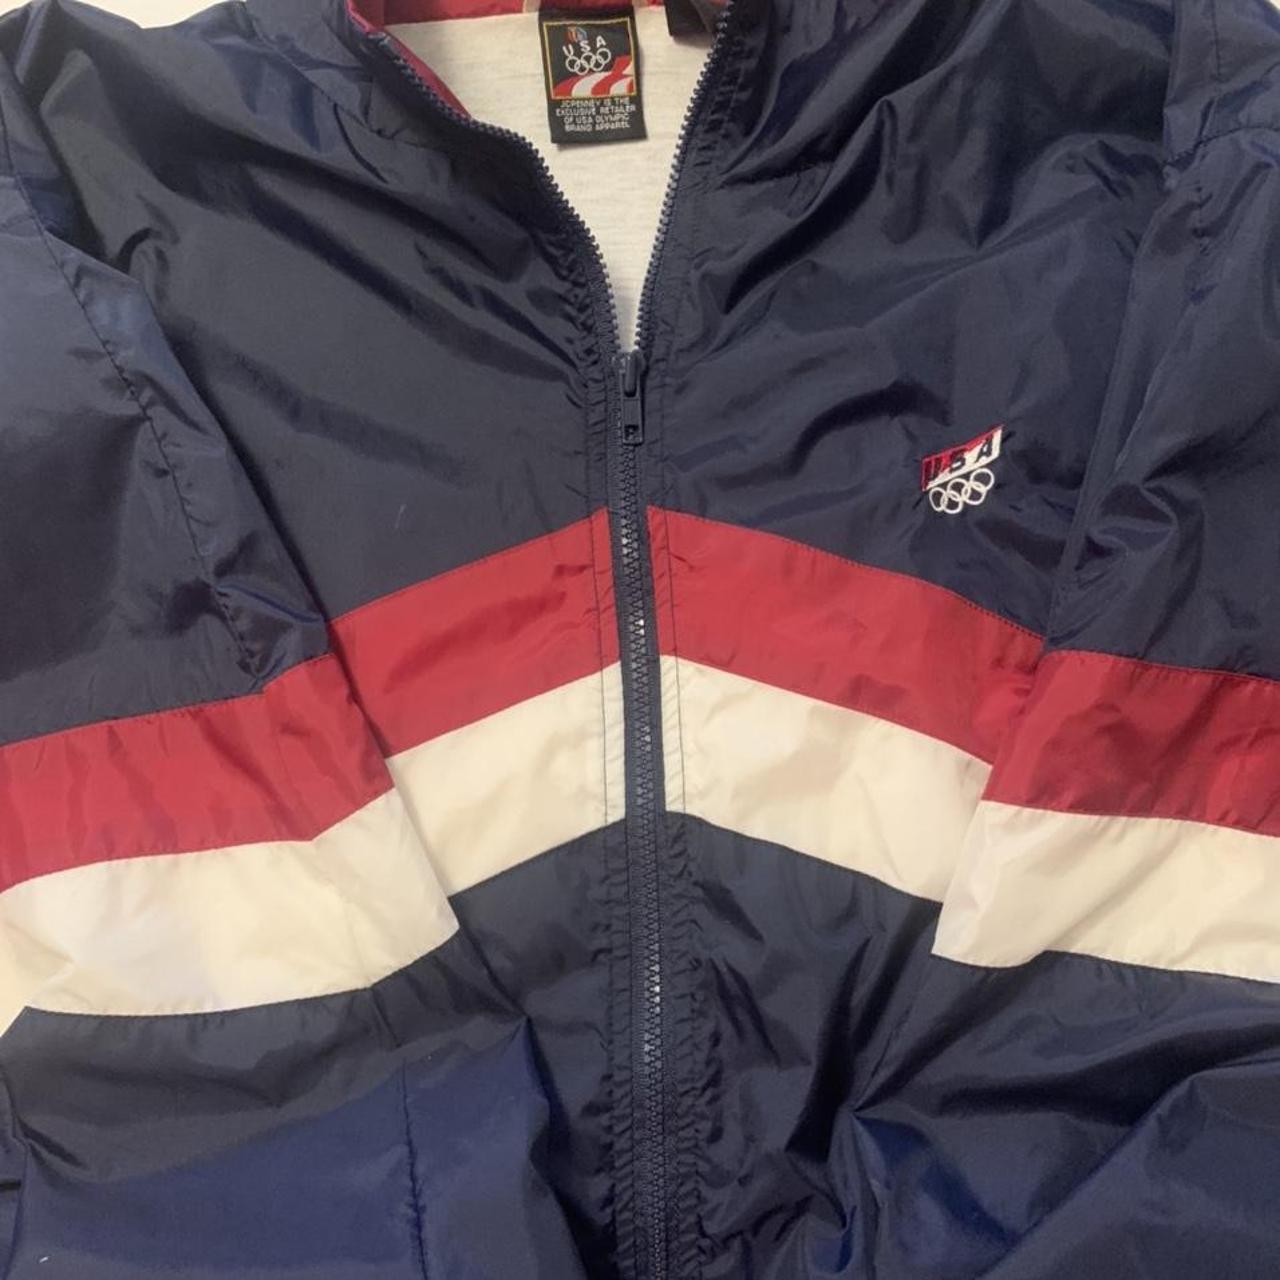 JCPenney Men's Navy and Red Jacket | Depop